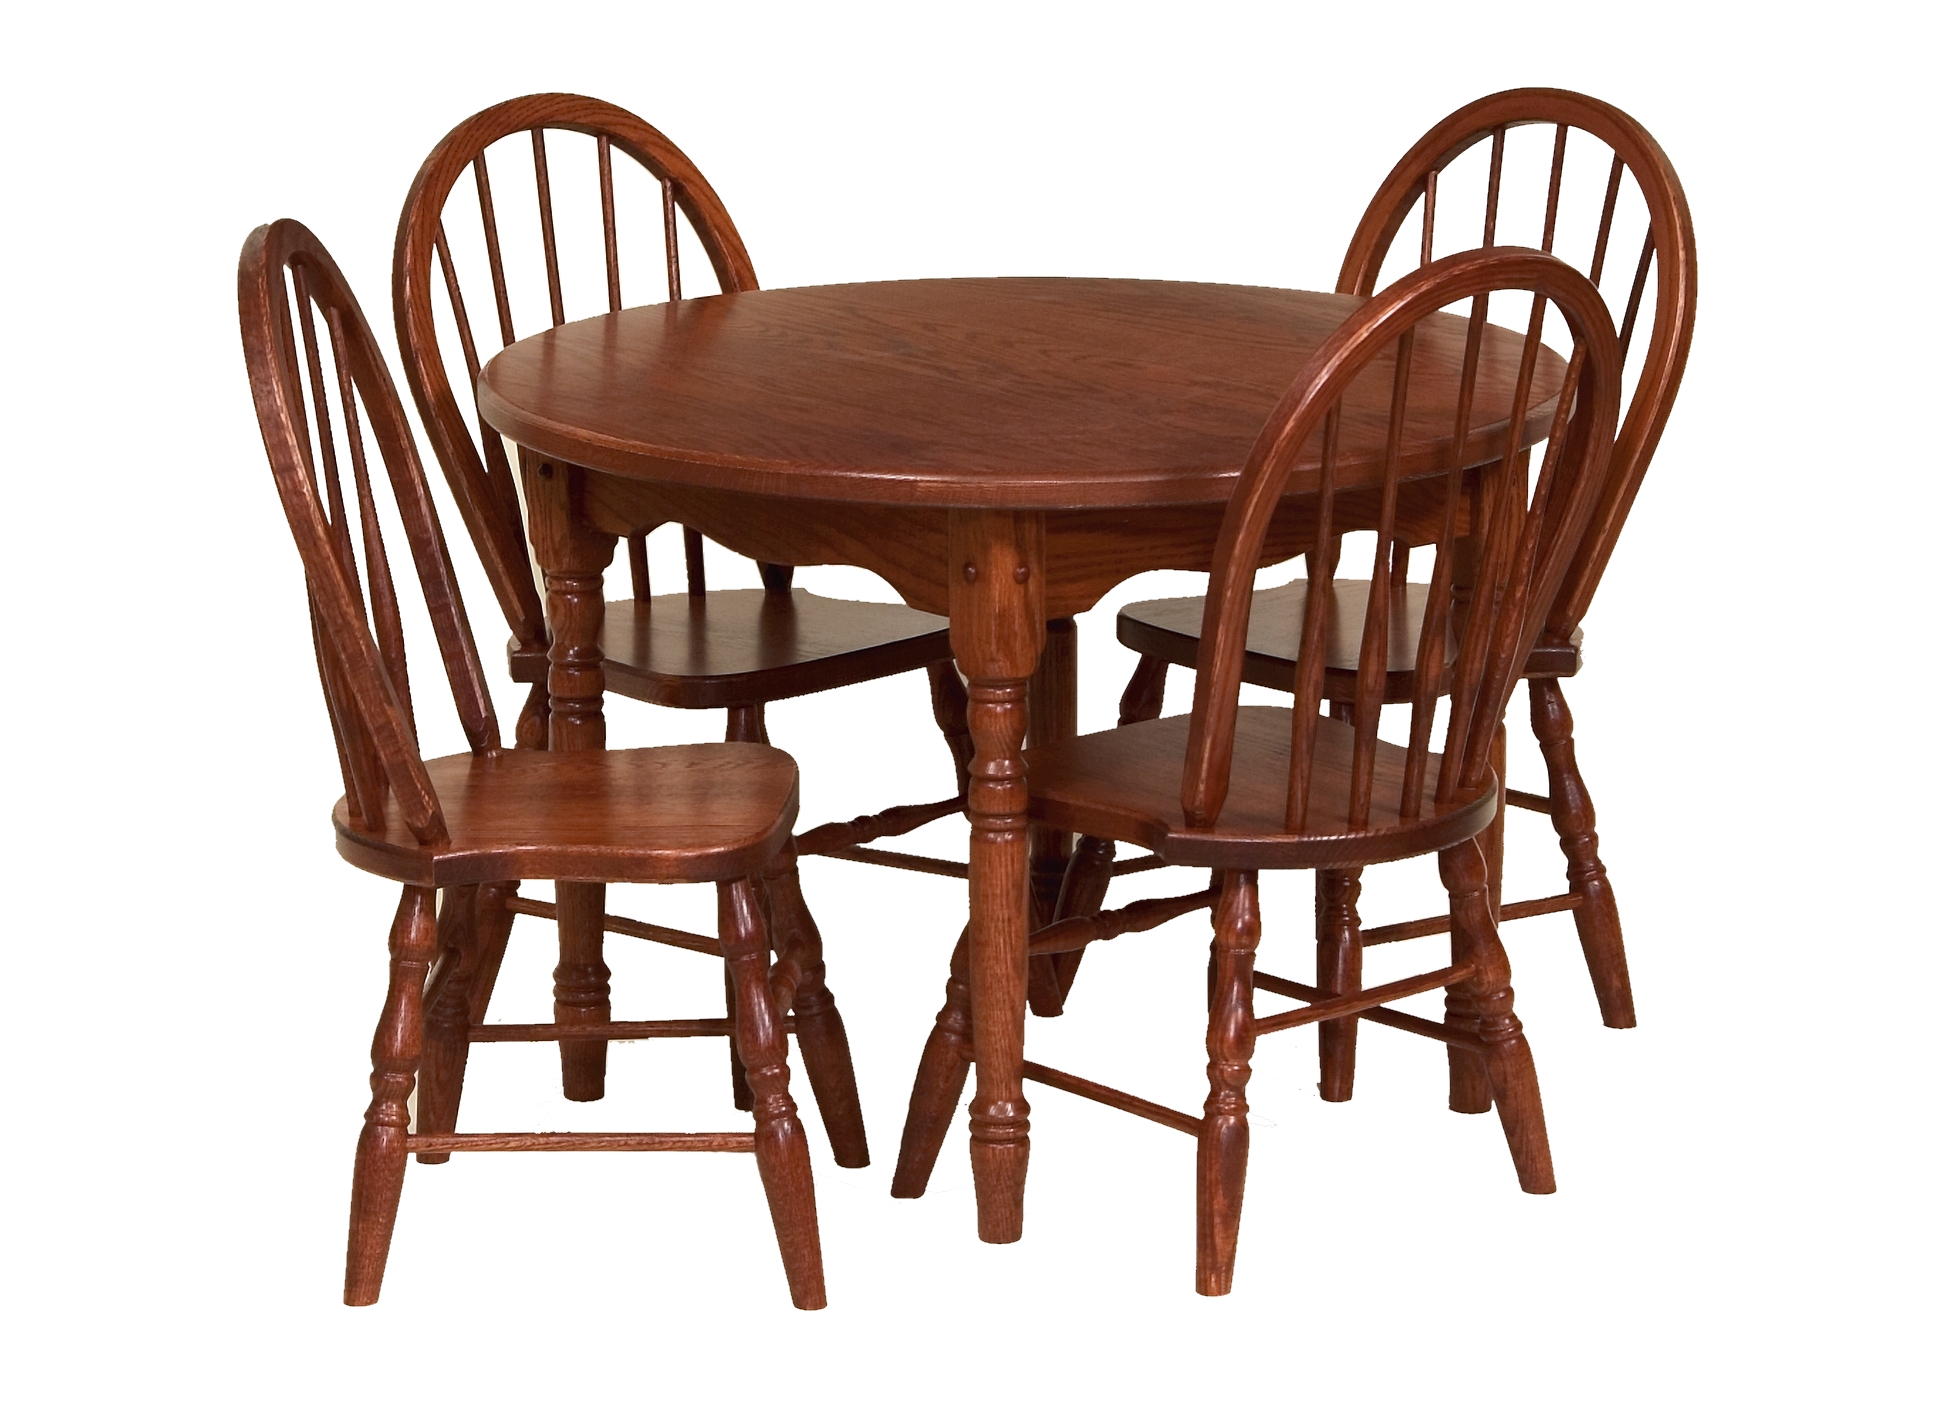 Child’s Small Round Table Set Image